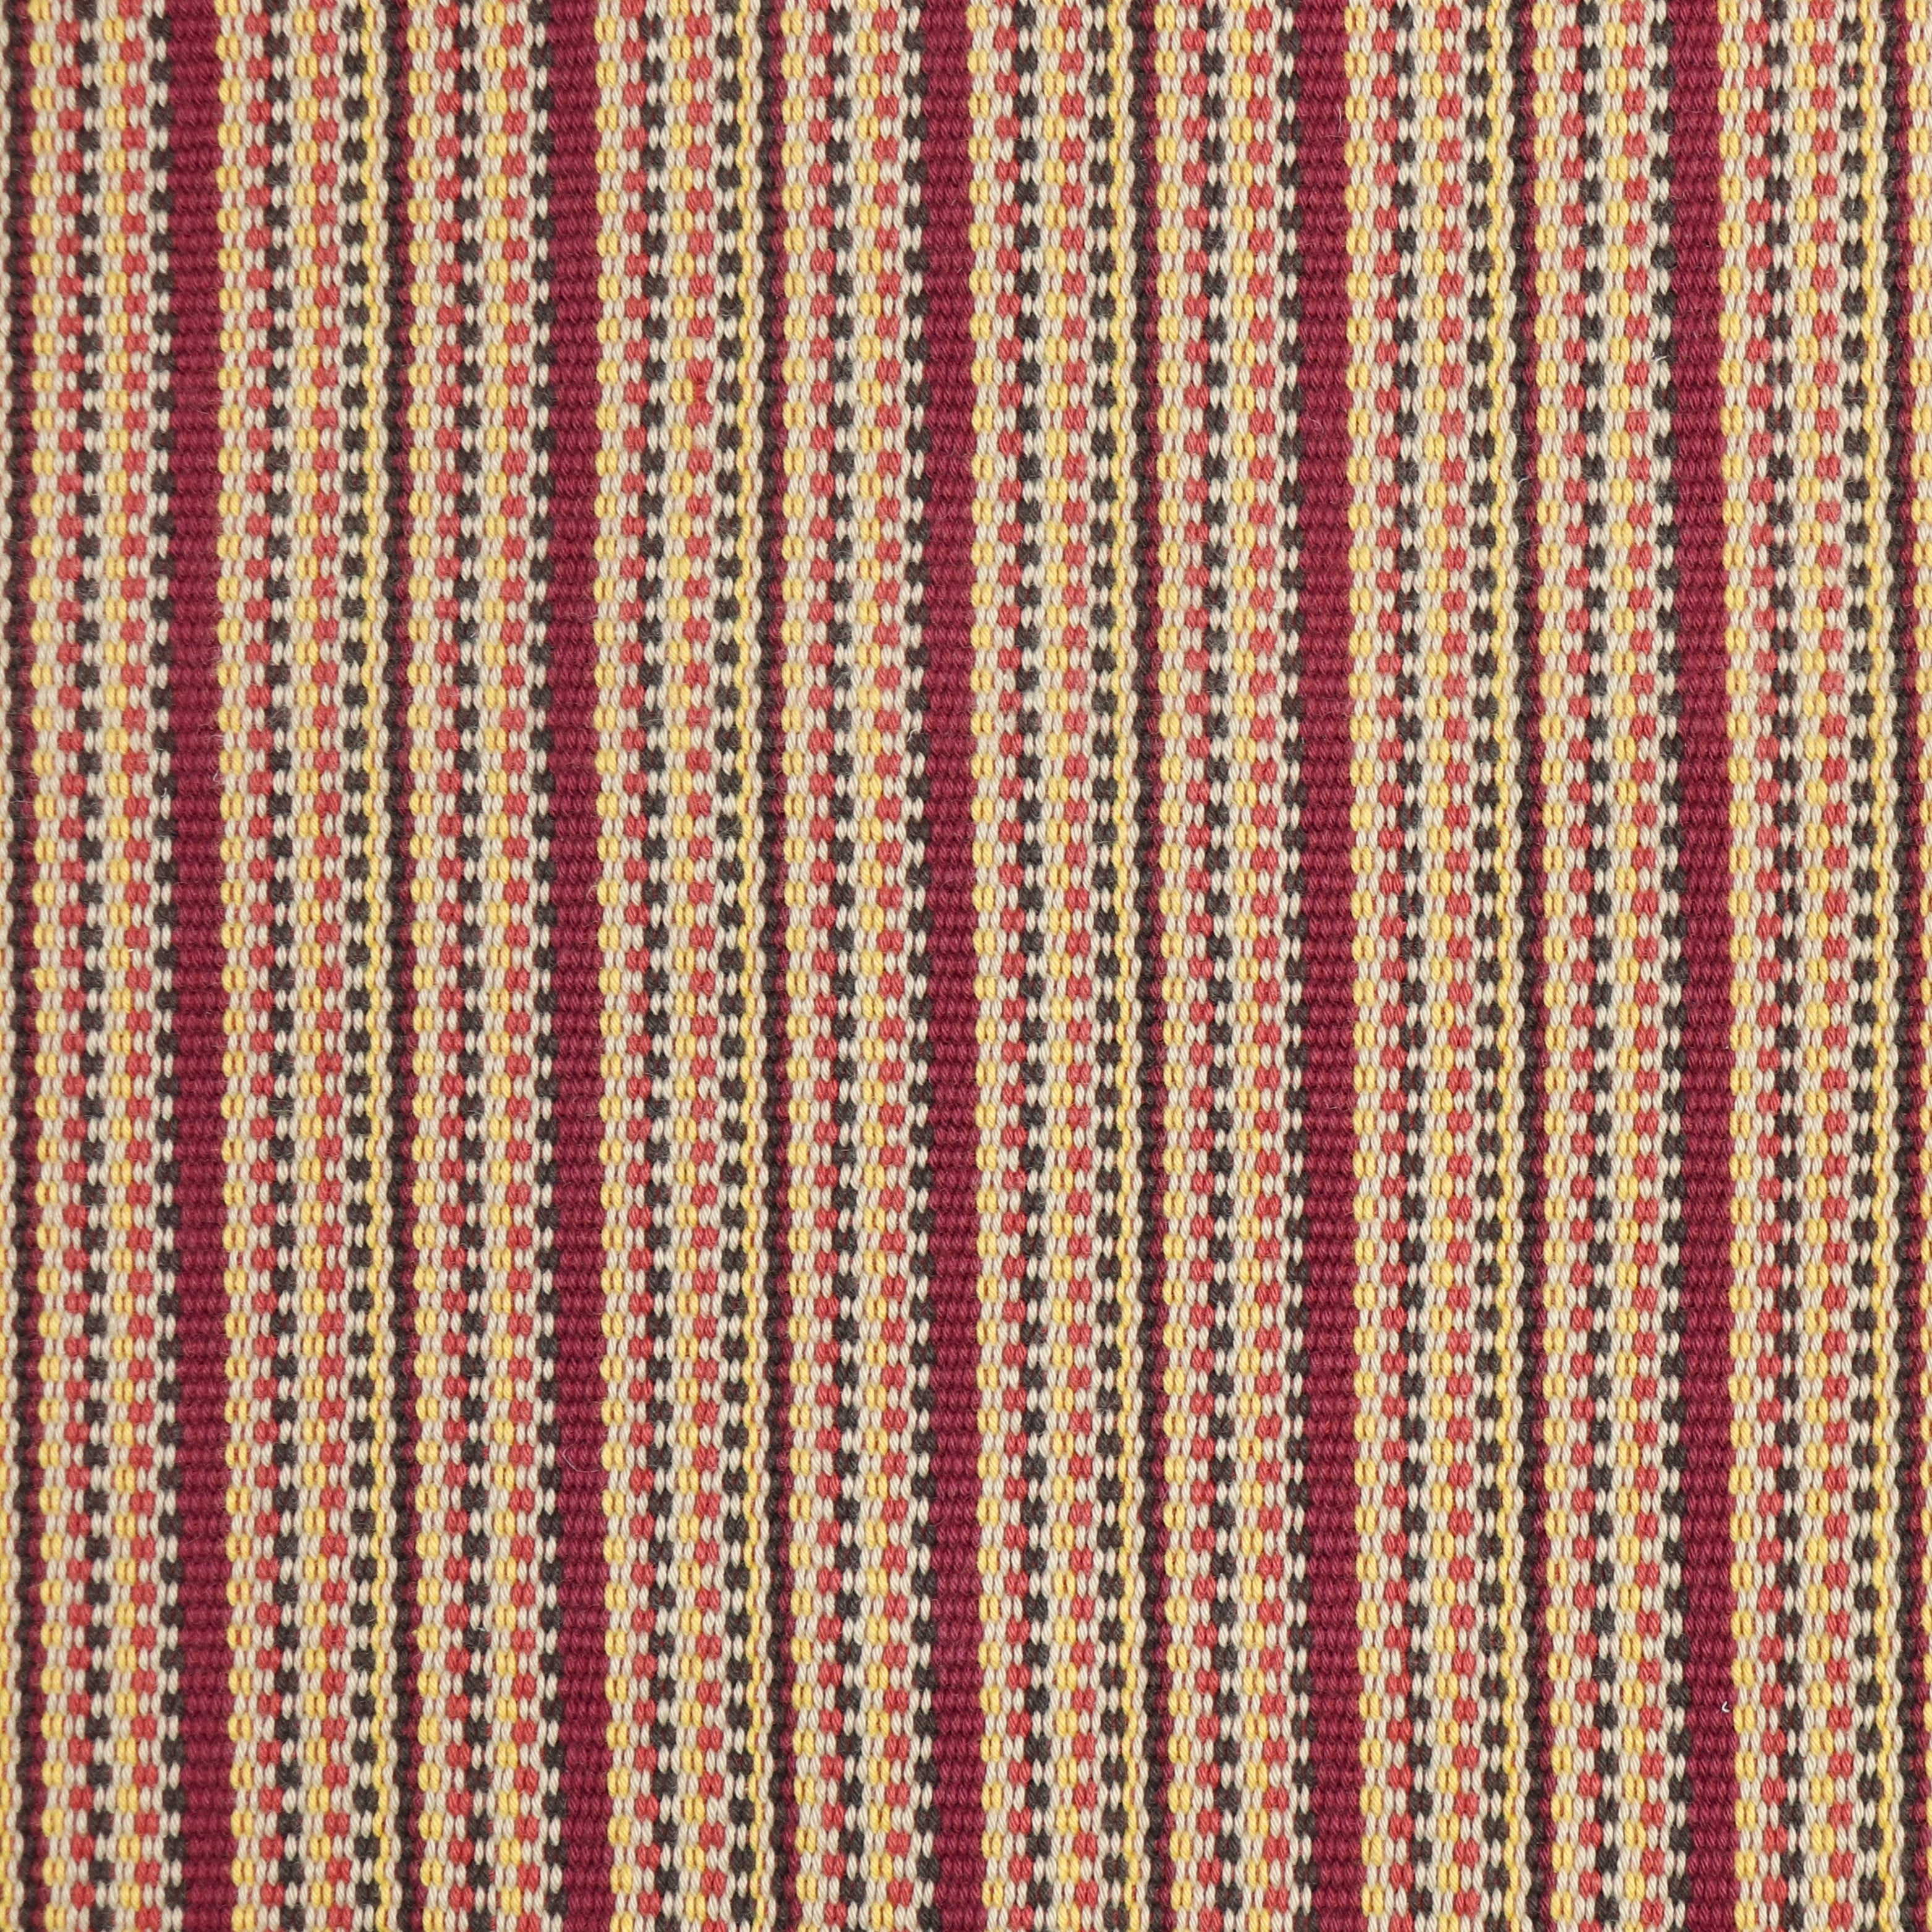 Detail of a hand-woven cotton fabric in an intricate gridded stripe pattern in shades of red, brown, yellow and cream.